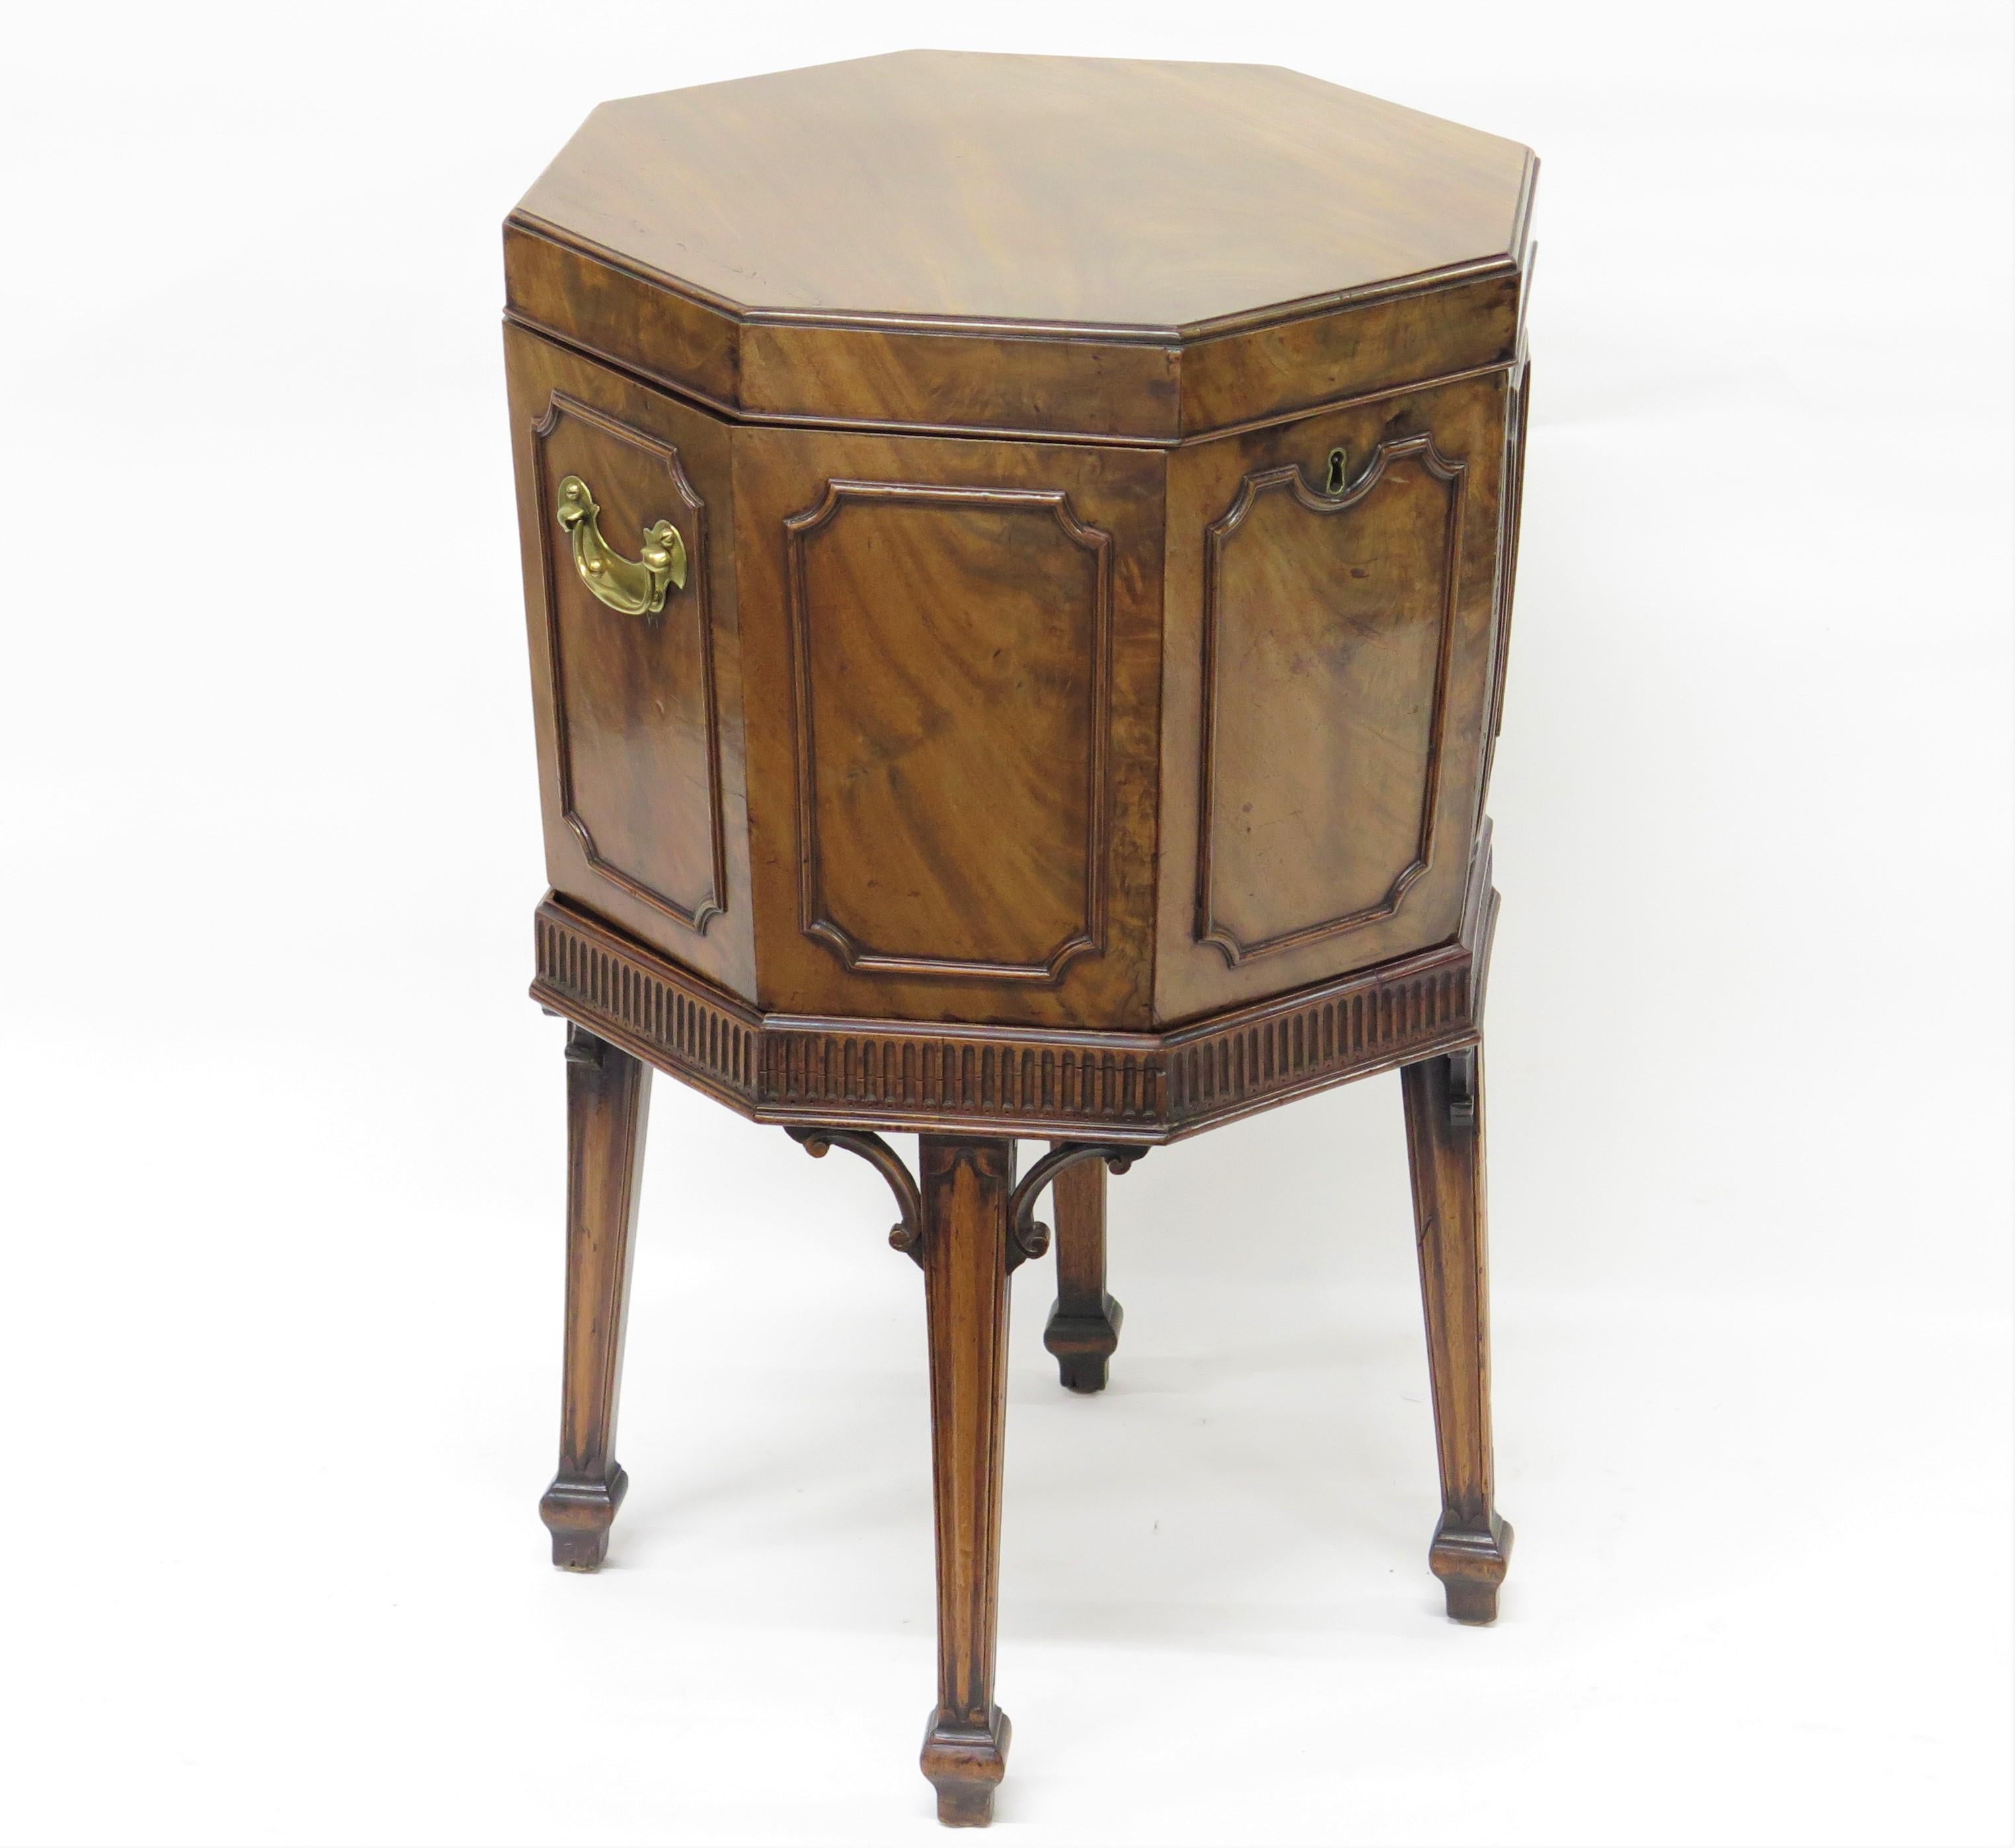 an octagonal George III mahogany cellarette on stand, beautifully figured mahogany sides with molding / trim panels, brass bail handles each side, rests on stand with four (4) tapered legs each having 